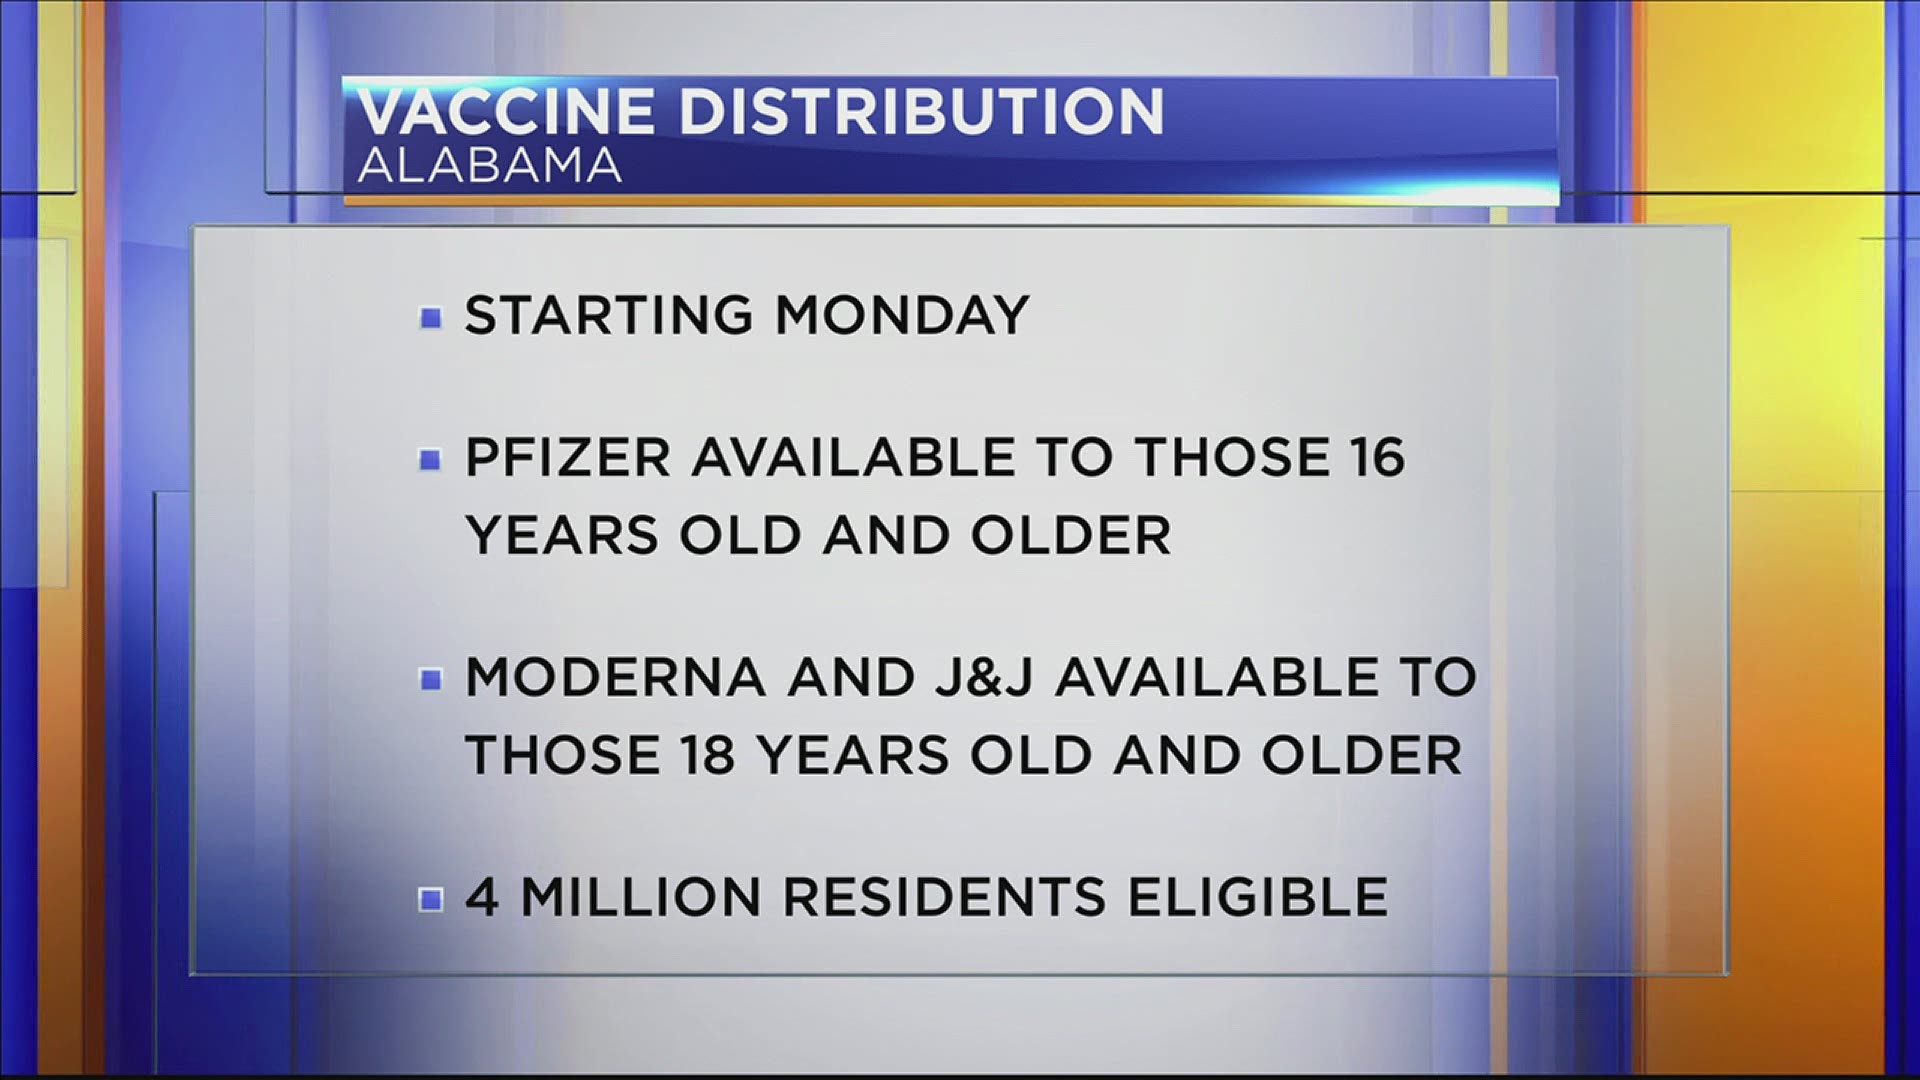 Beginning, April 5, the Alabama Department of Public Health will extend eligibility for COVID-19 vaccinations to include individuals age 16 and older.